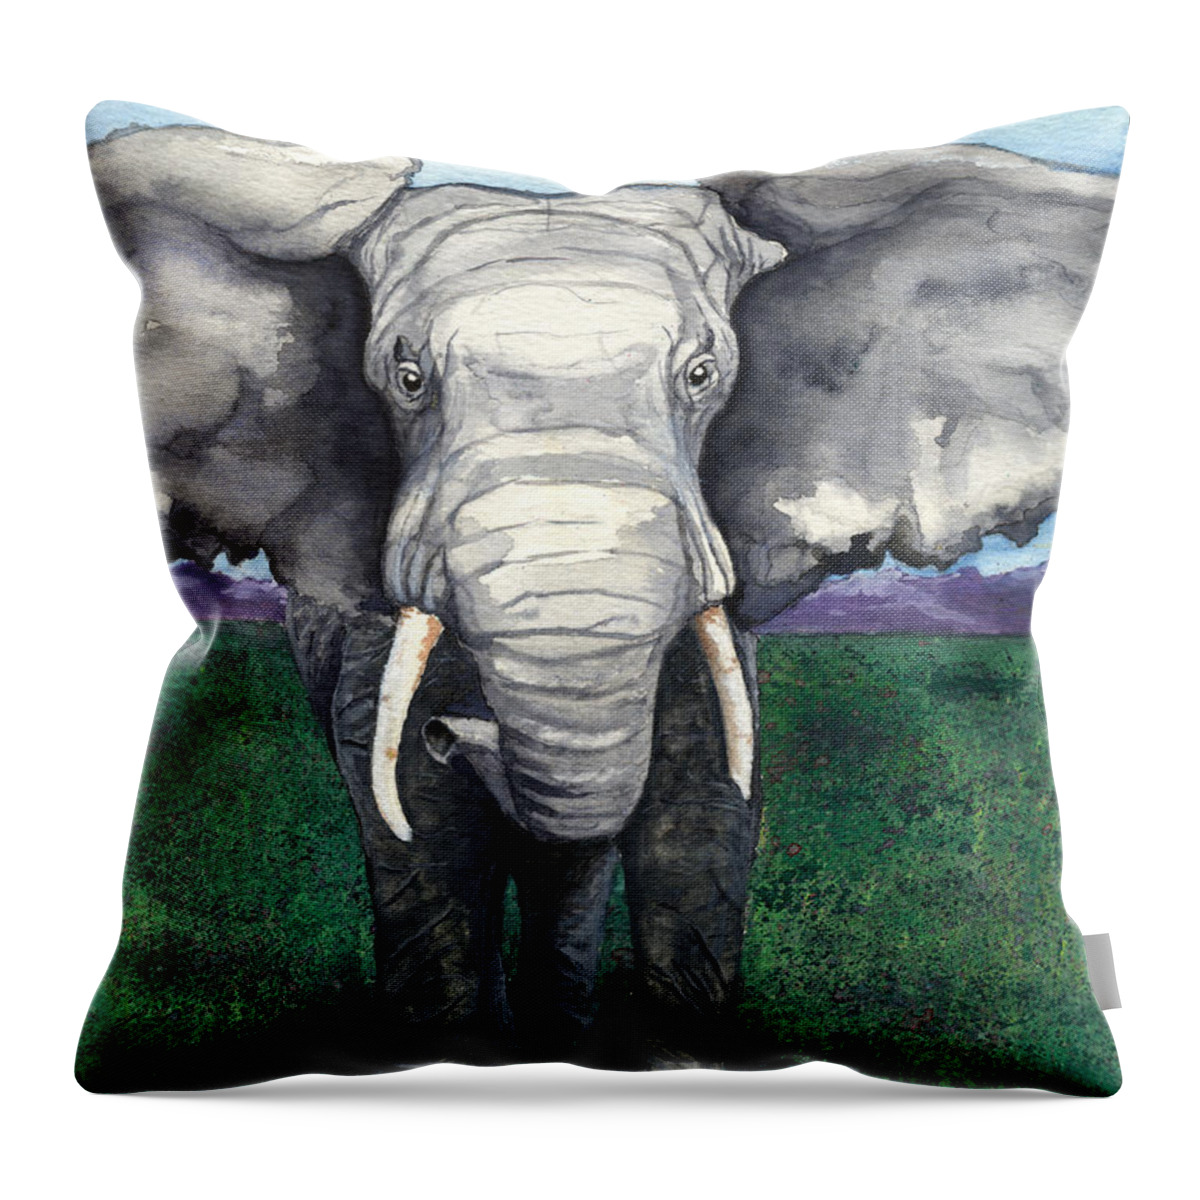 Watercolour Throw Pillow featuring the painting Defiant #2 by Brazen Design Studio